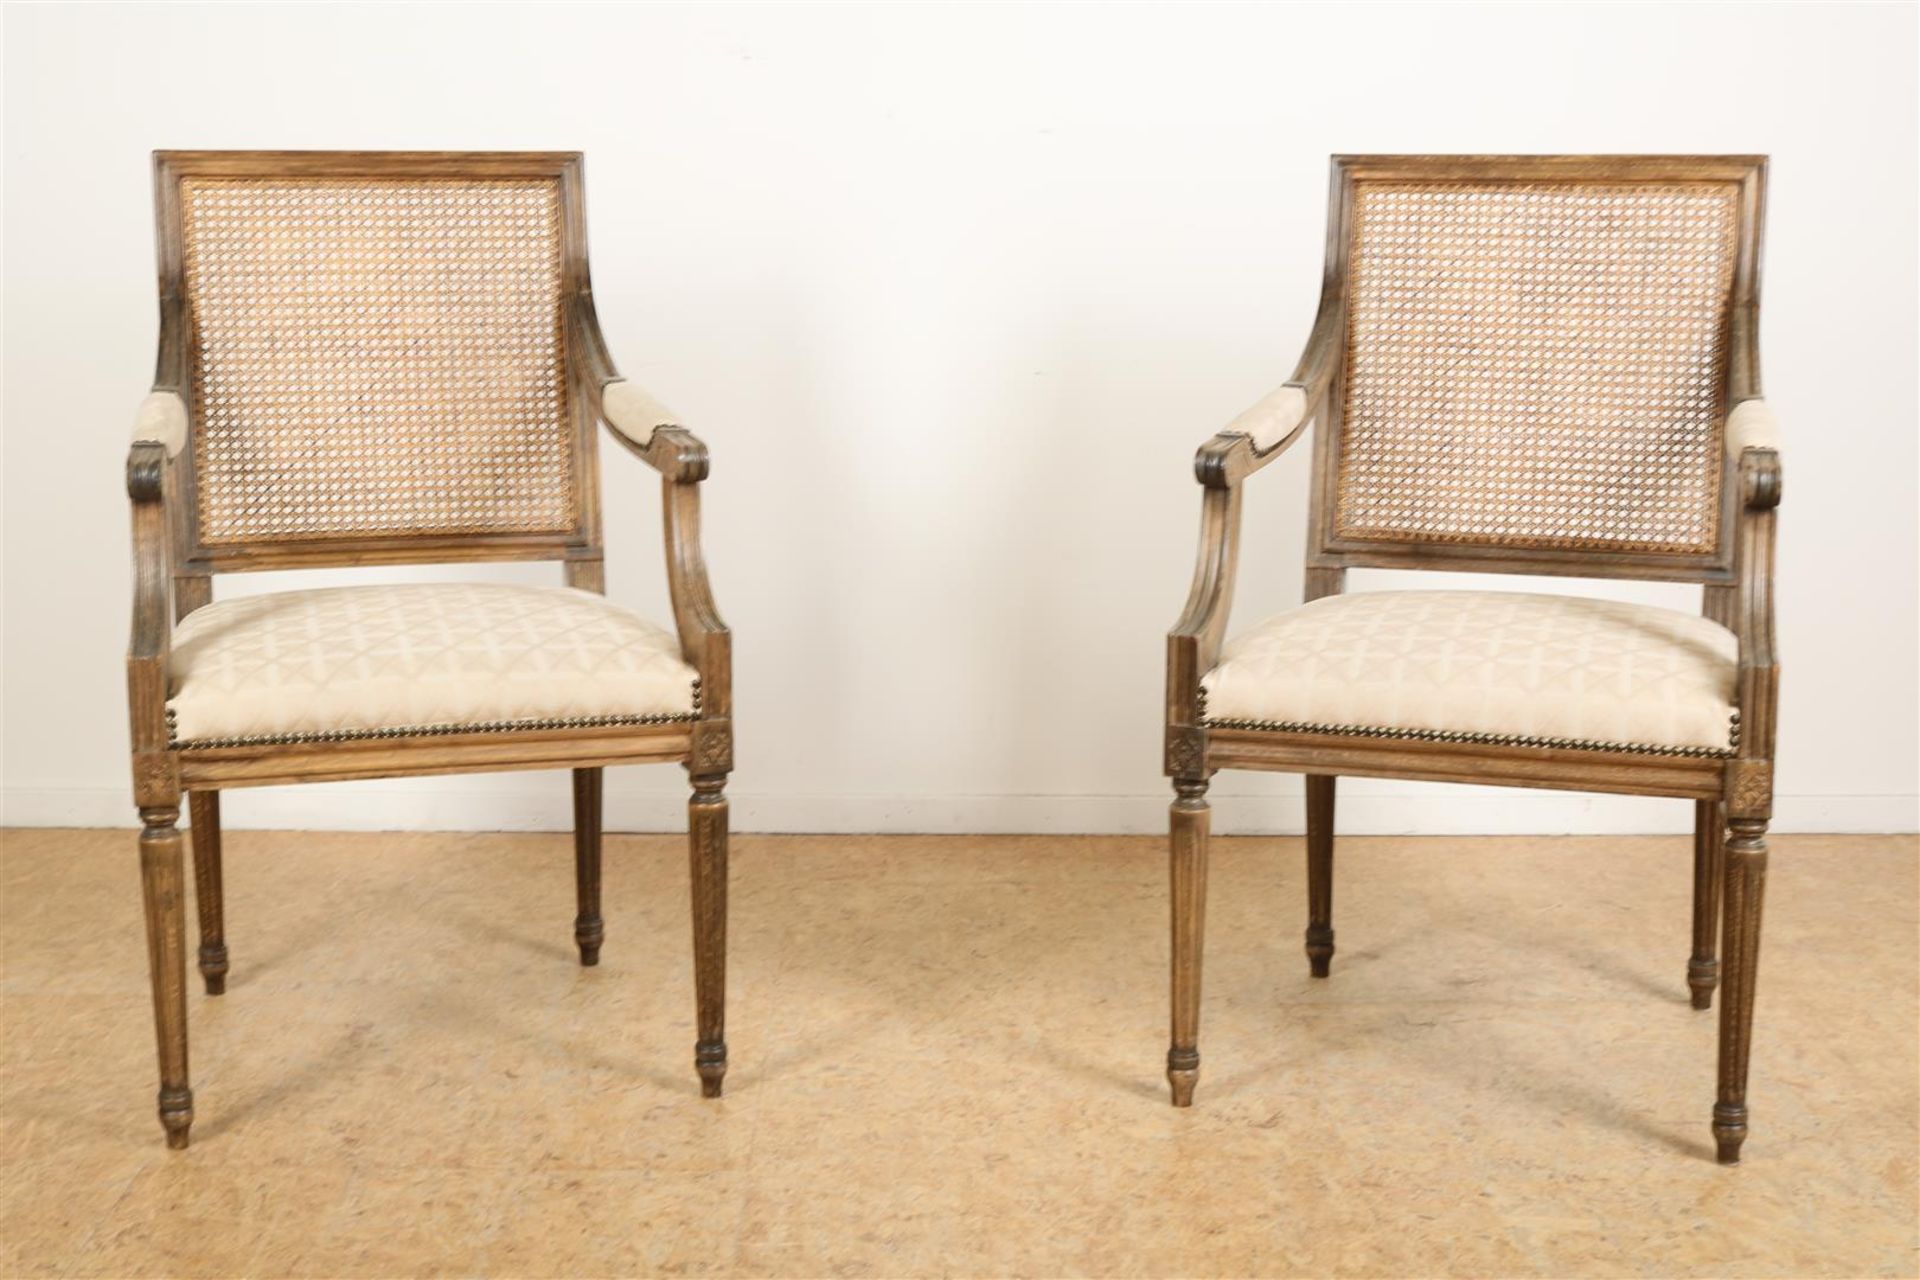 Set of Louis XVI style armchairs with woven backrest and checkered upholstery.